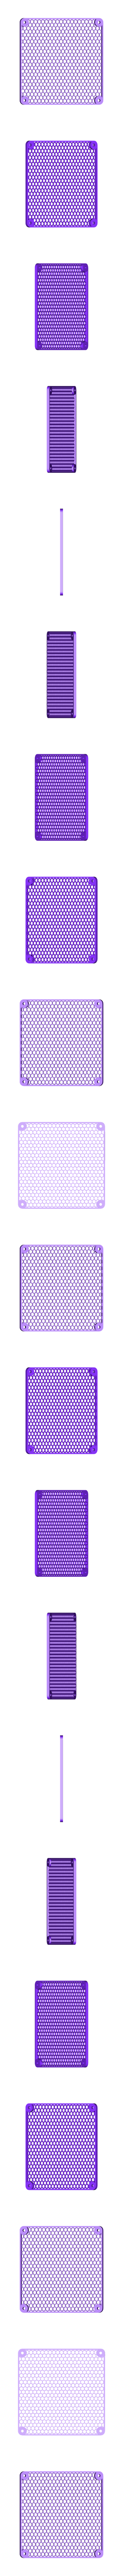 140mm_honeycomb_reduced_fan_cover.stl Download free STL file Customizable Fan Grill Cover • 3D print design, MightyNozzle